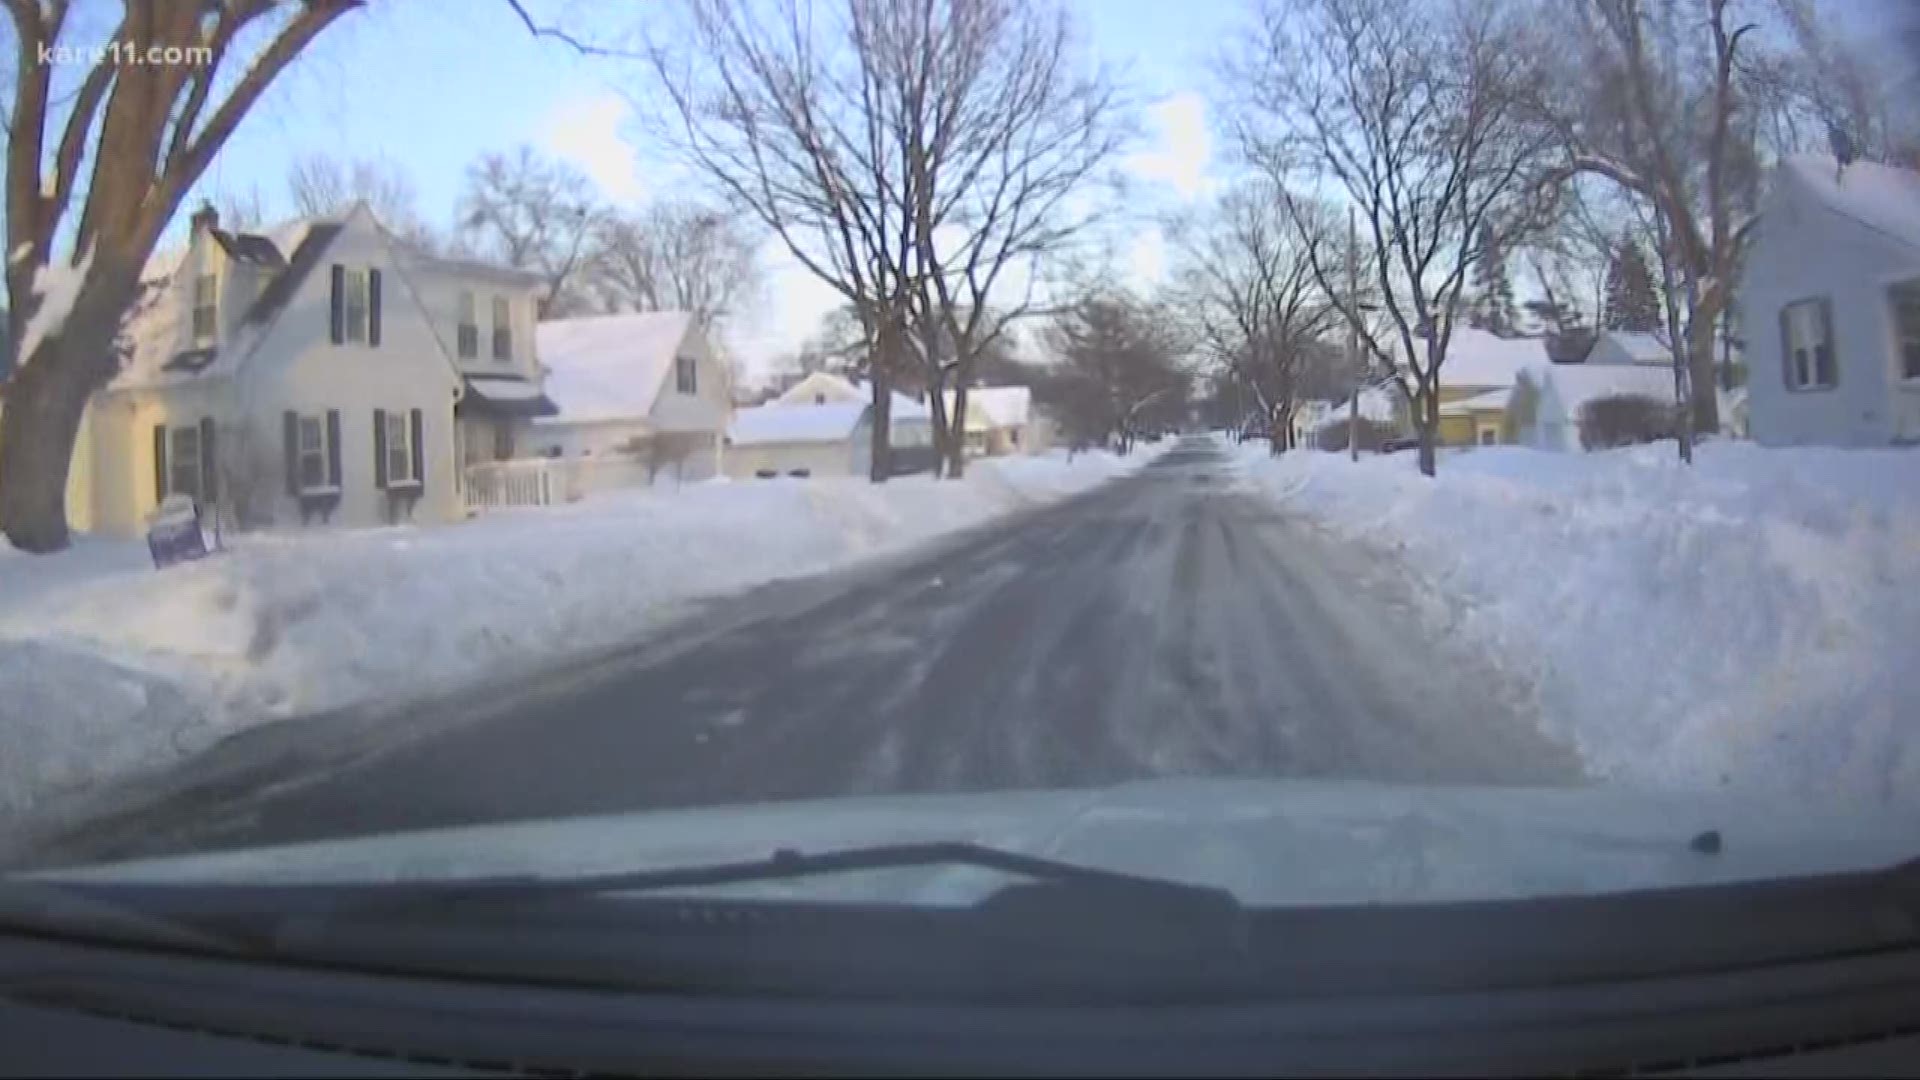 We got more than 30 inches of snow this month. KARE 11's Karla Hult looks at the trouble those totals are creating for drivers - and whole cities.